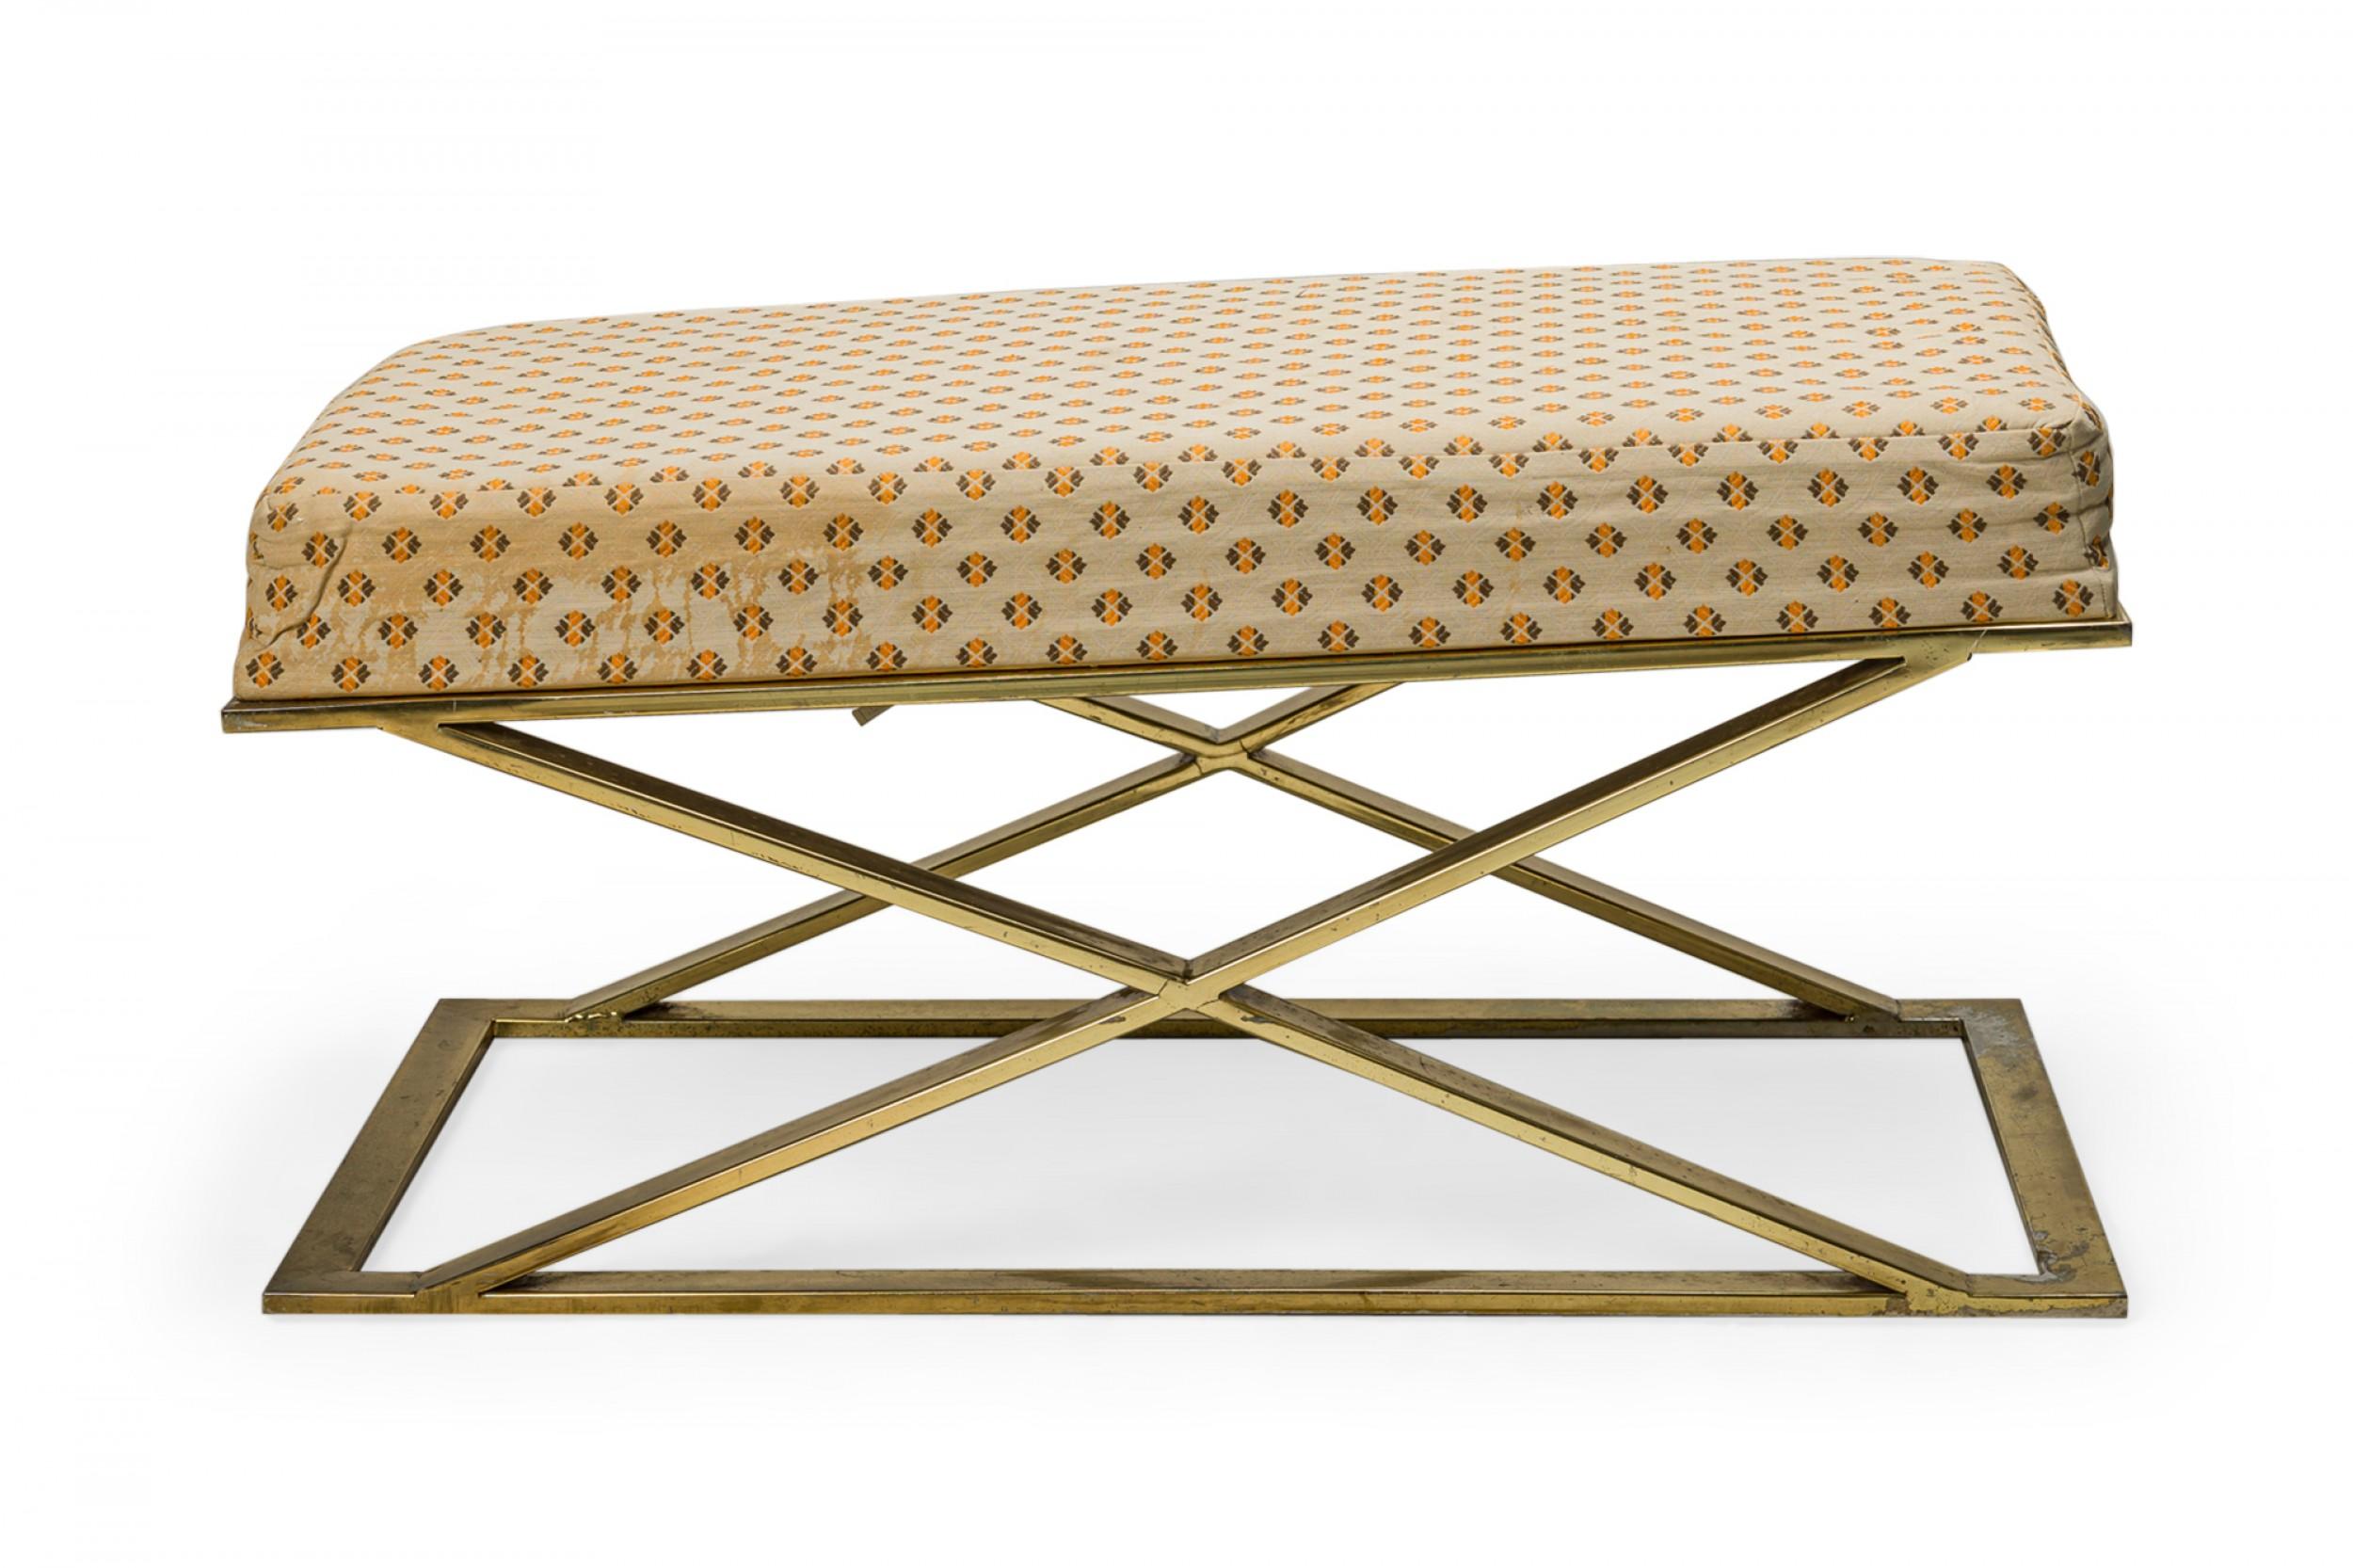 American Mid-Century bench with a beige, orange, and brown patterned fabric upholstered seat resting on a brass X-form base. (MILO BAUGHMAN / THAYER COGGIN)(Similar piece: DUF0372)